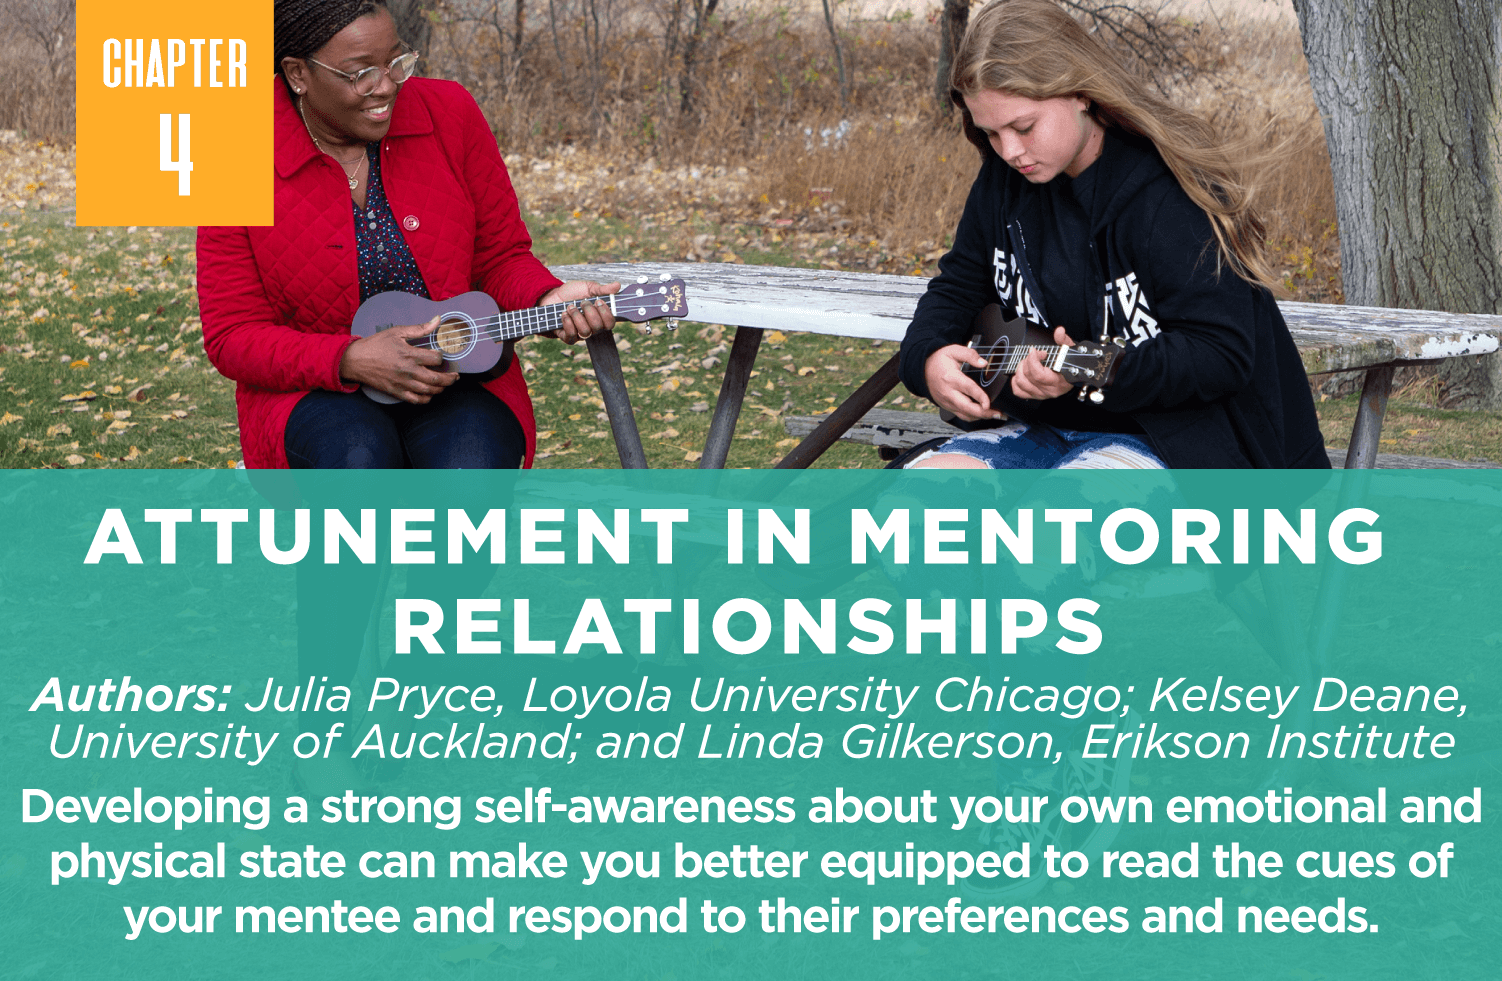 Attunement in Mentoring 
Relationships
Authors: Julia Pryce, Loyola University Chicago; Kelsey Deane, University of Auckland; and Linda Gilkerson, Erikson Institute
Developing a strong self-awareness about your own emotional and physical state can make you better equipped to read the cues of your mentee and respond to their preferences and needs.